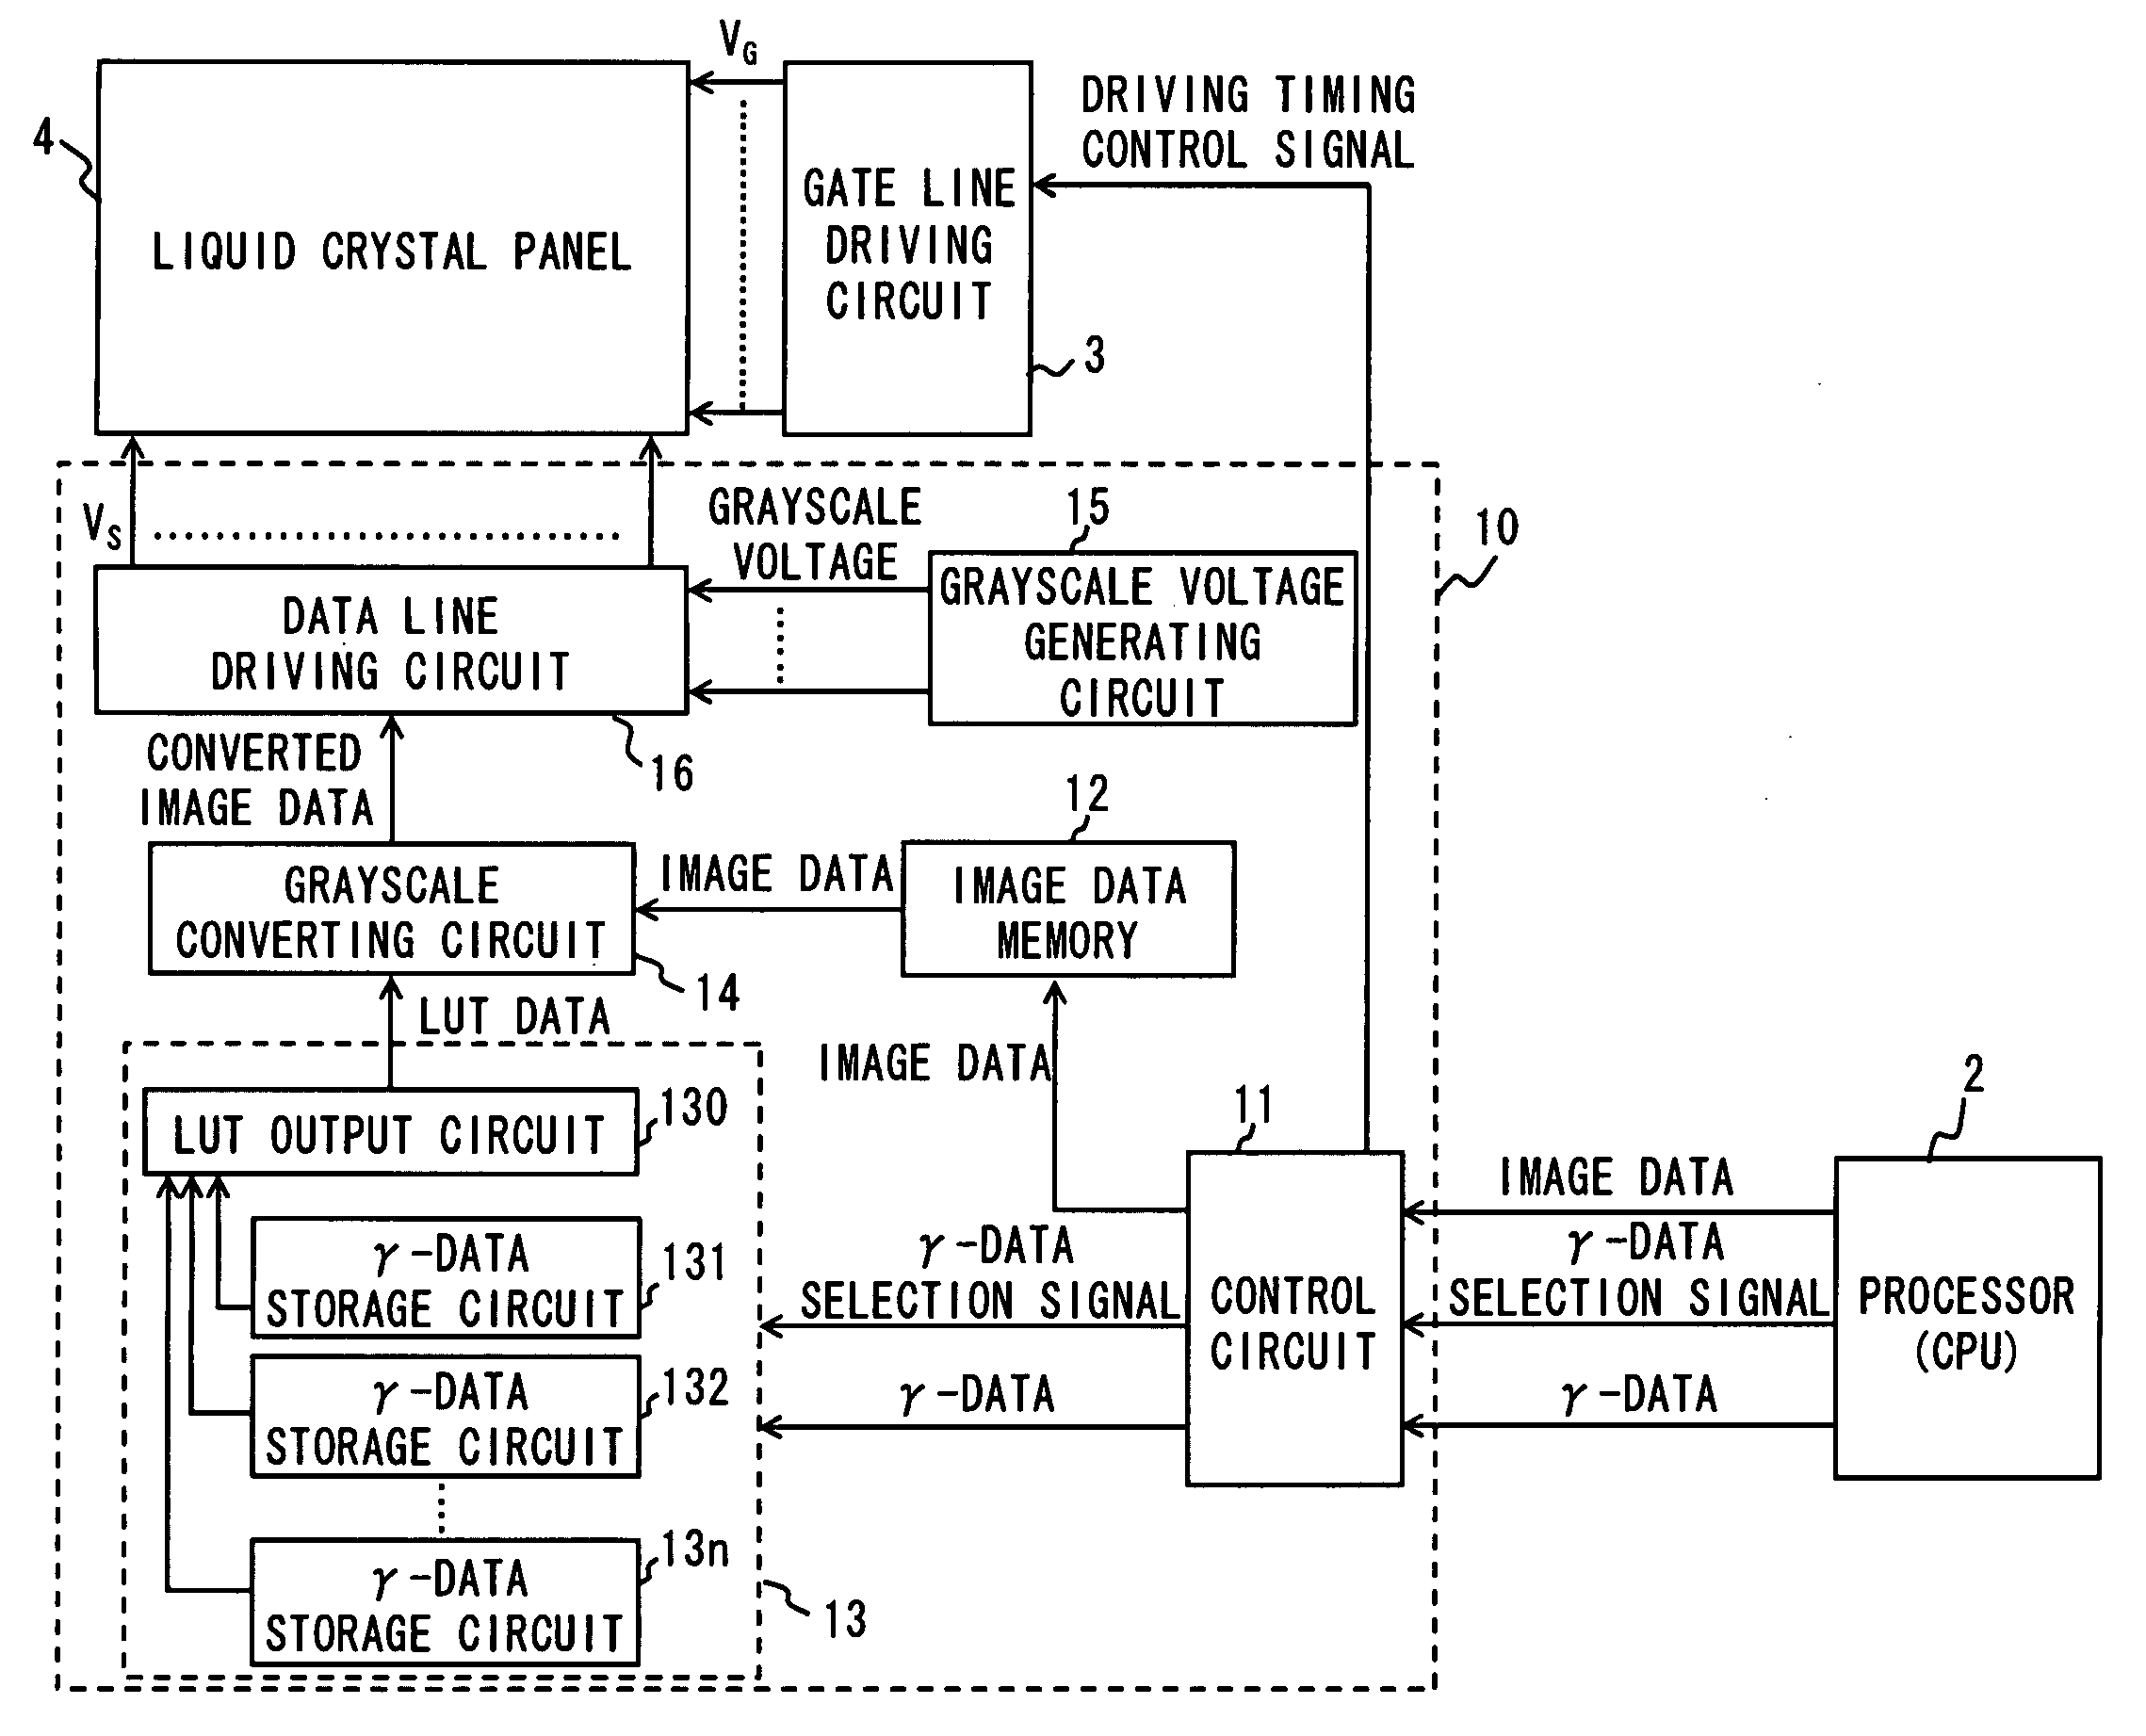 Display control apparatus and method of creating look-up table